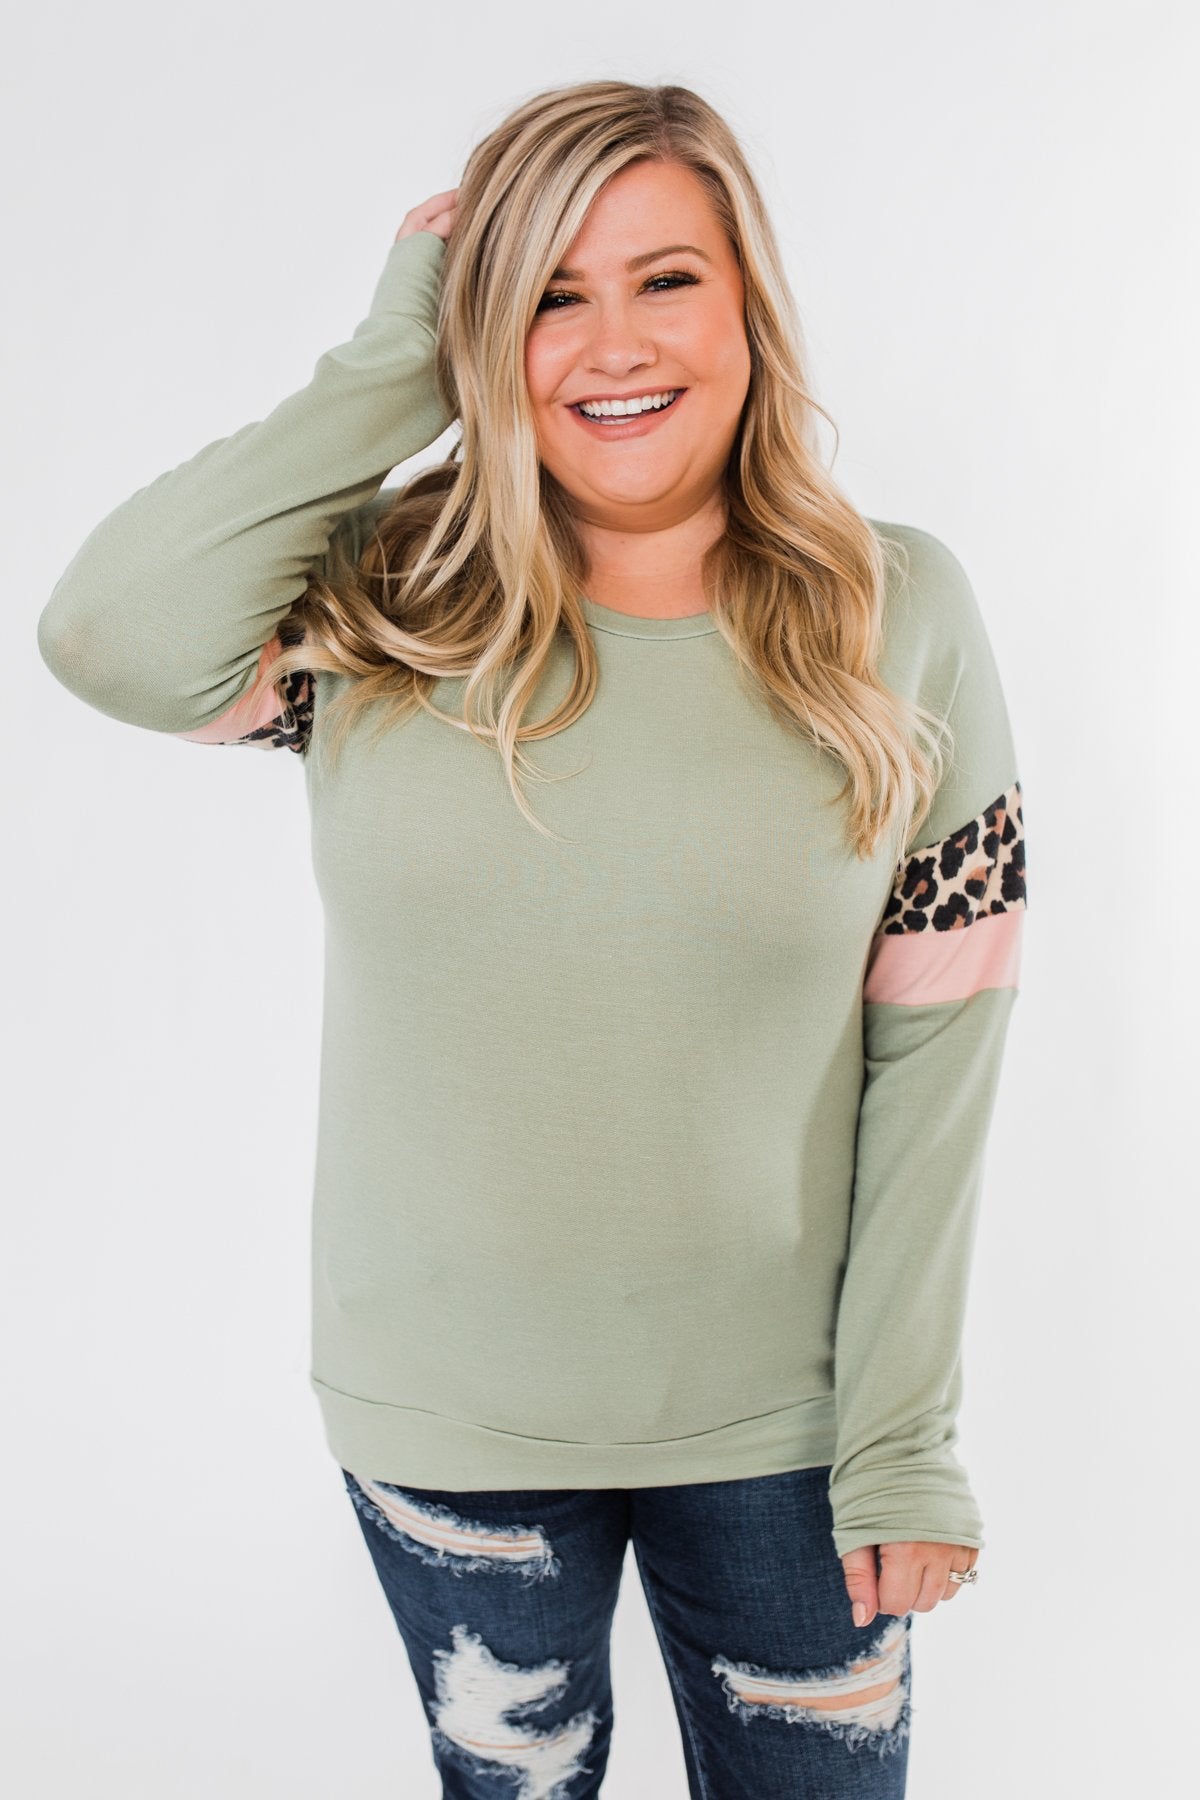 Can't Be Tamed Long Sleeve Top- Sage, Leopard, & Blush